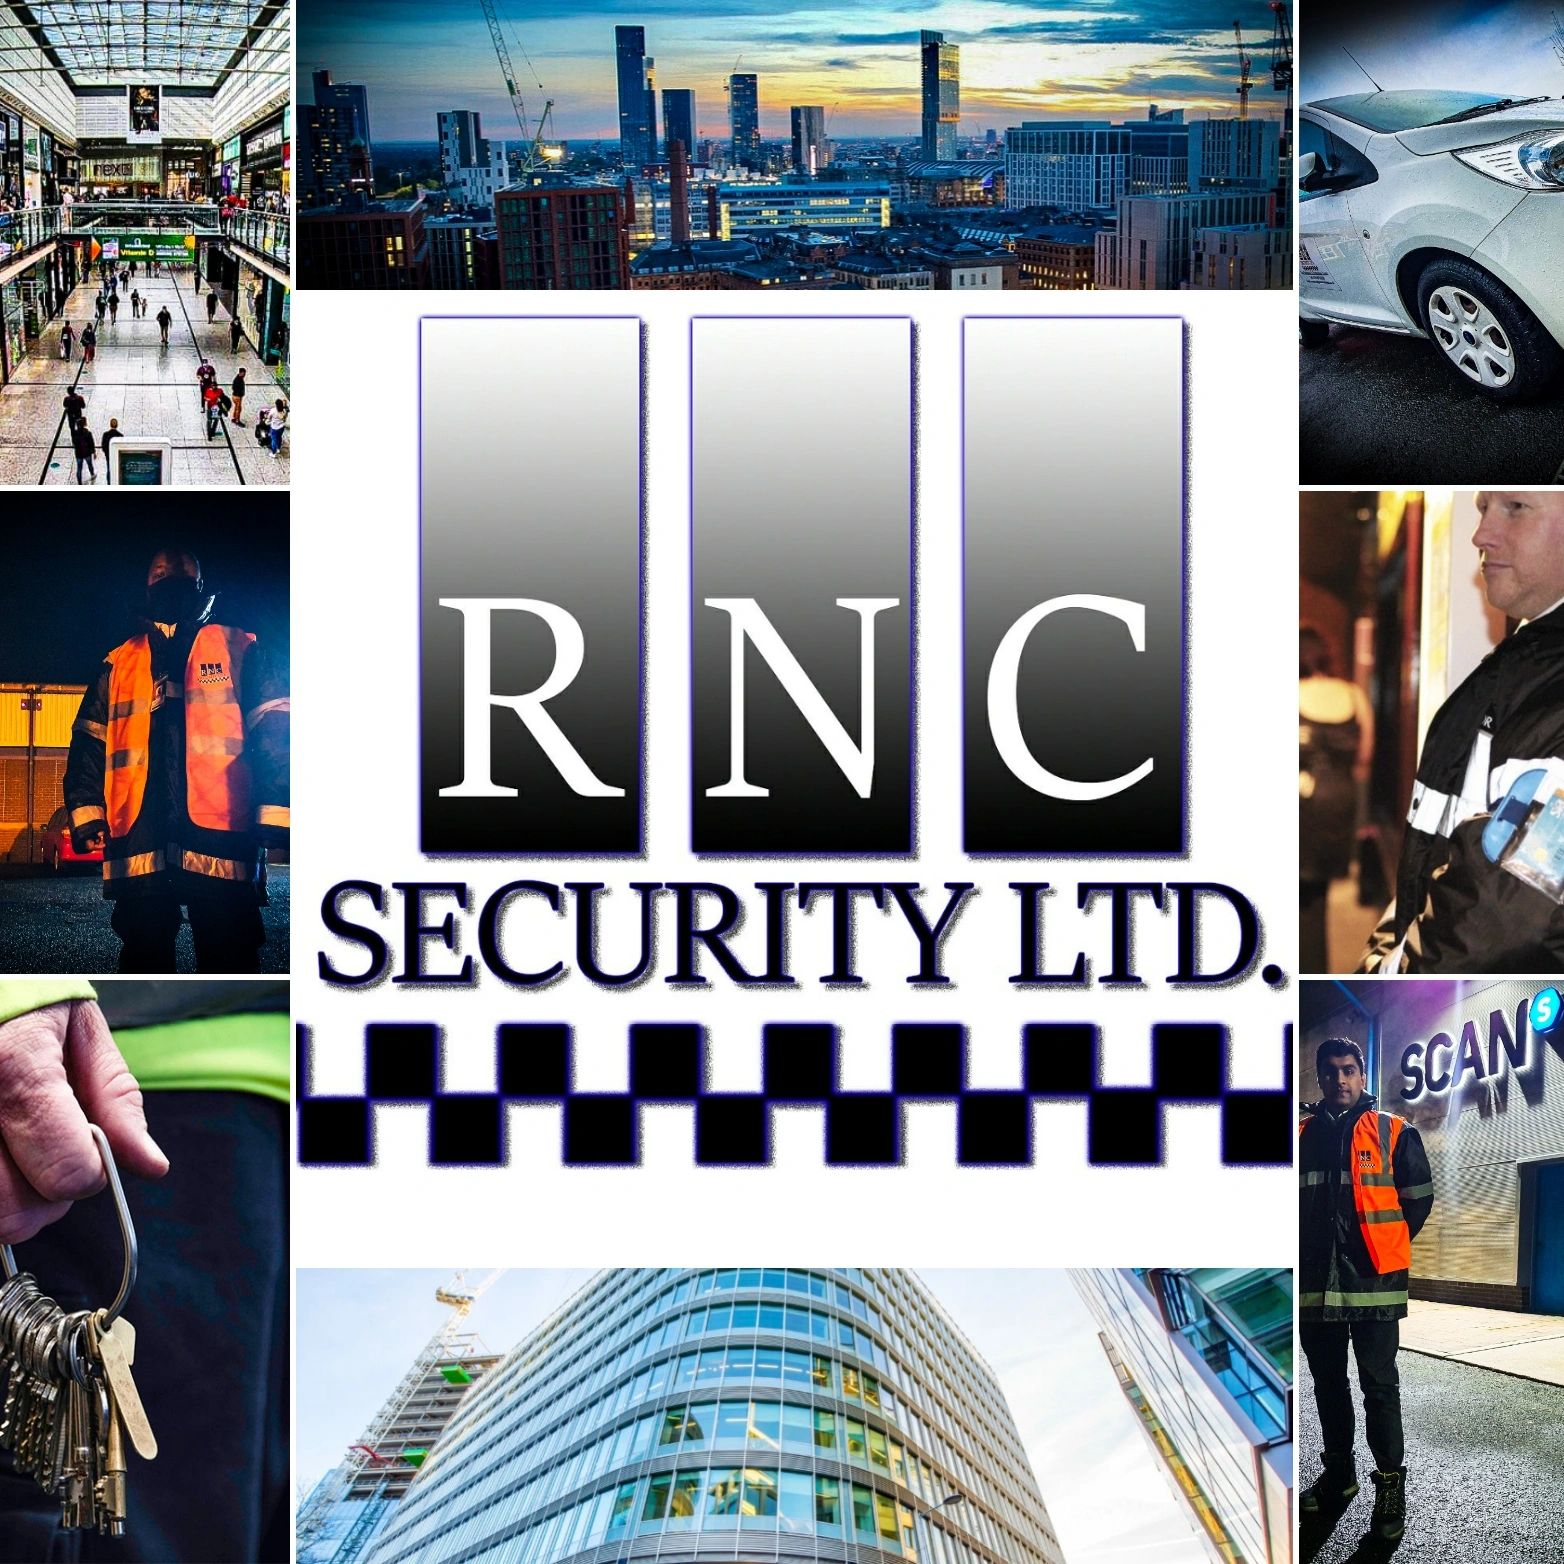 Security company in Manchester, Merseyside, Cheshire, Lancashire, Cumbria